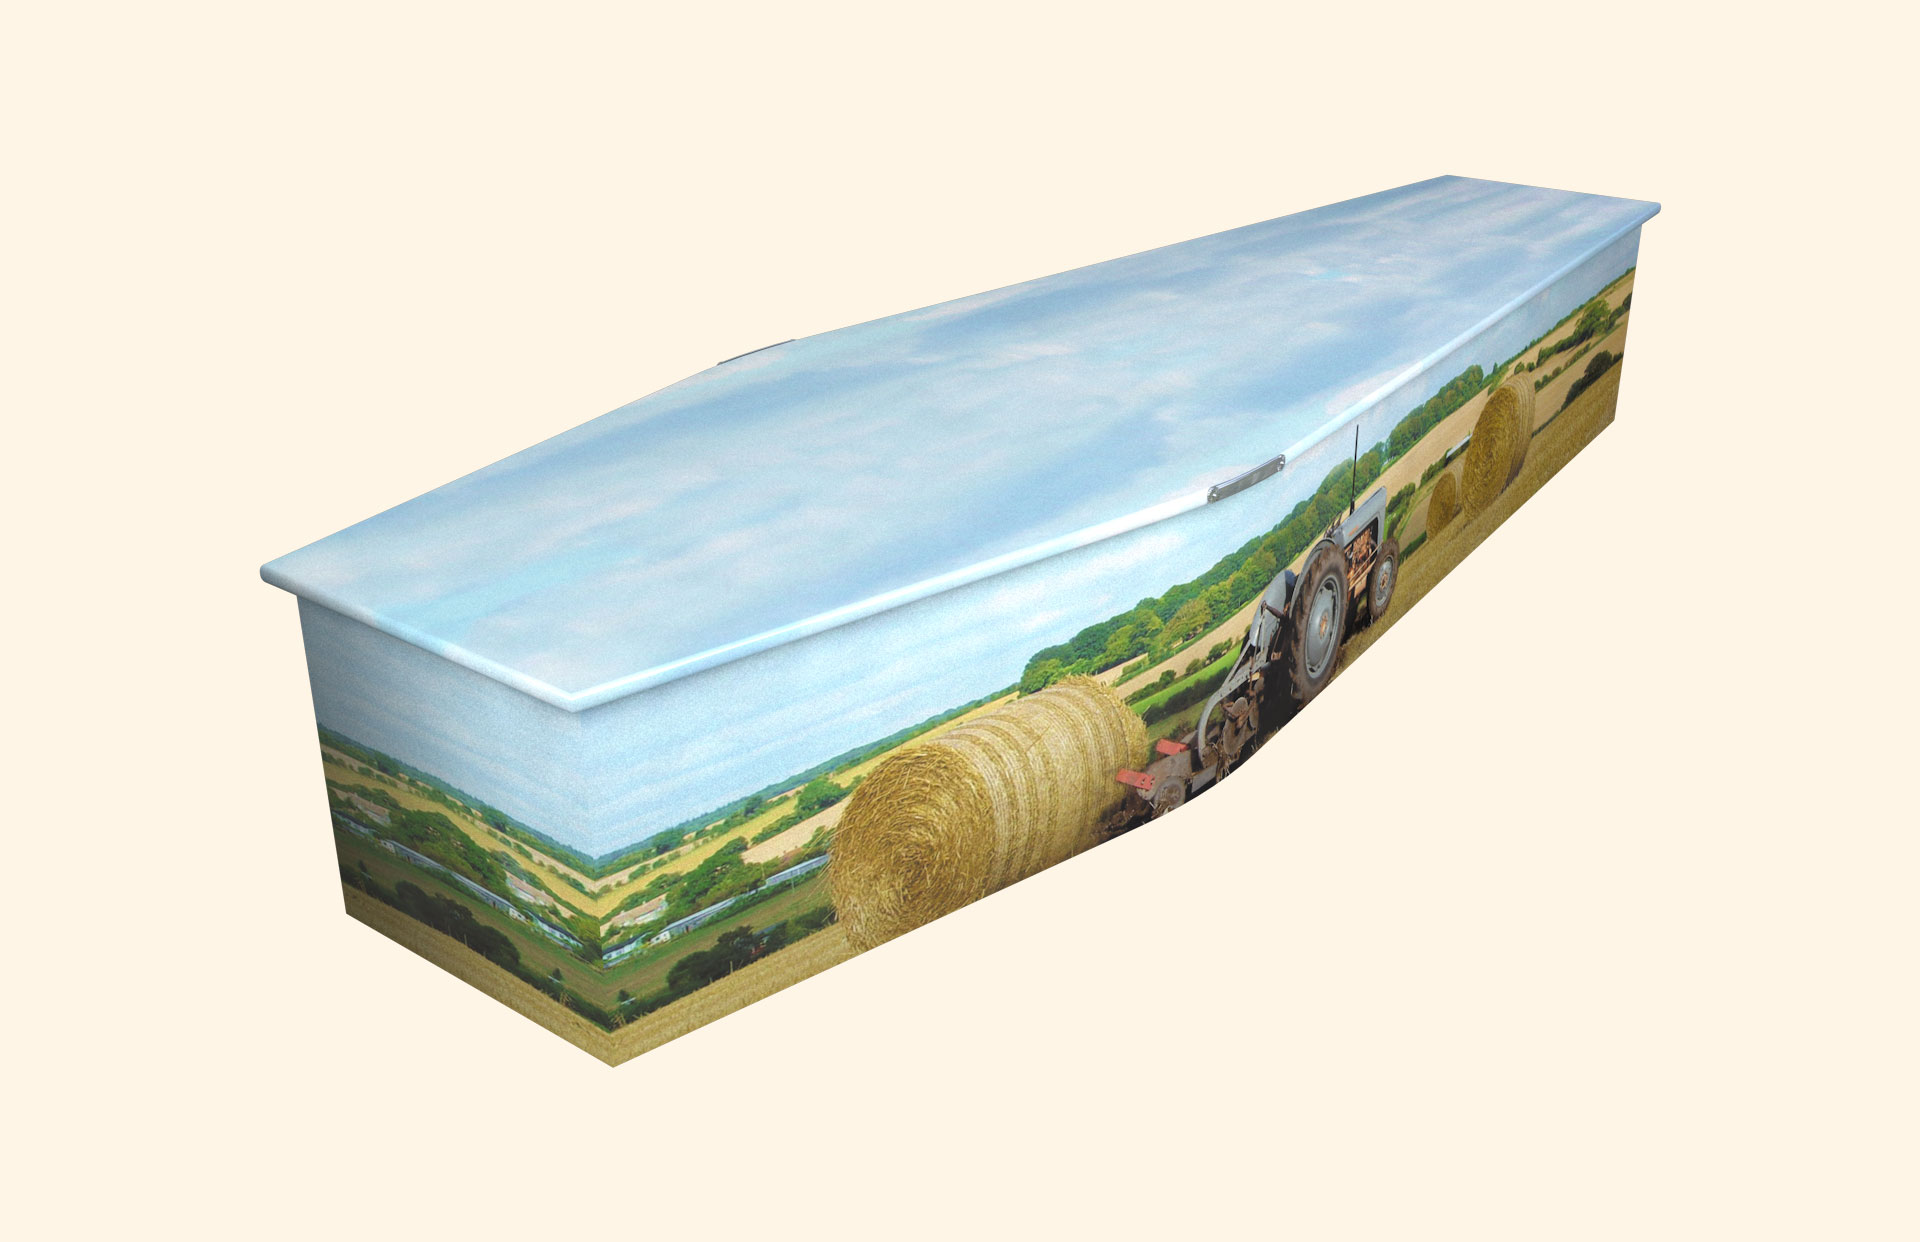 Hayfield design on a traditional coffin